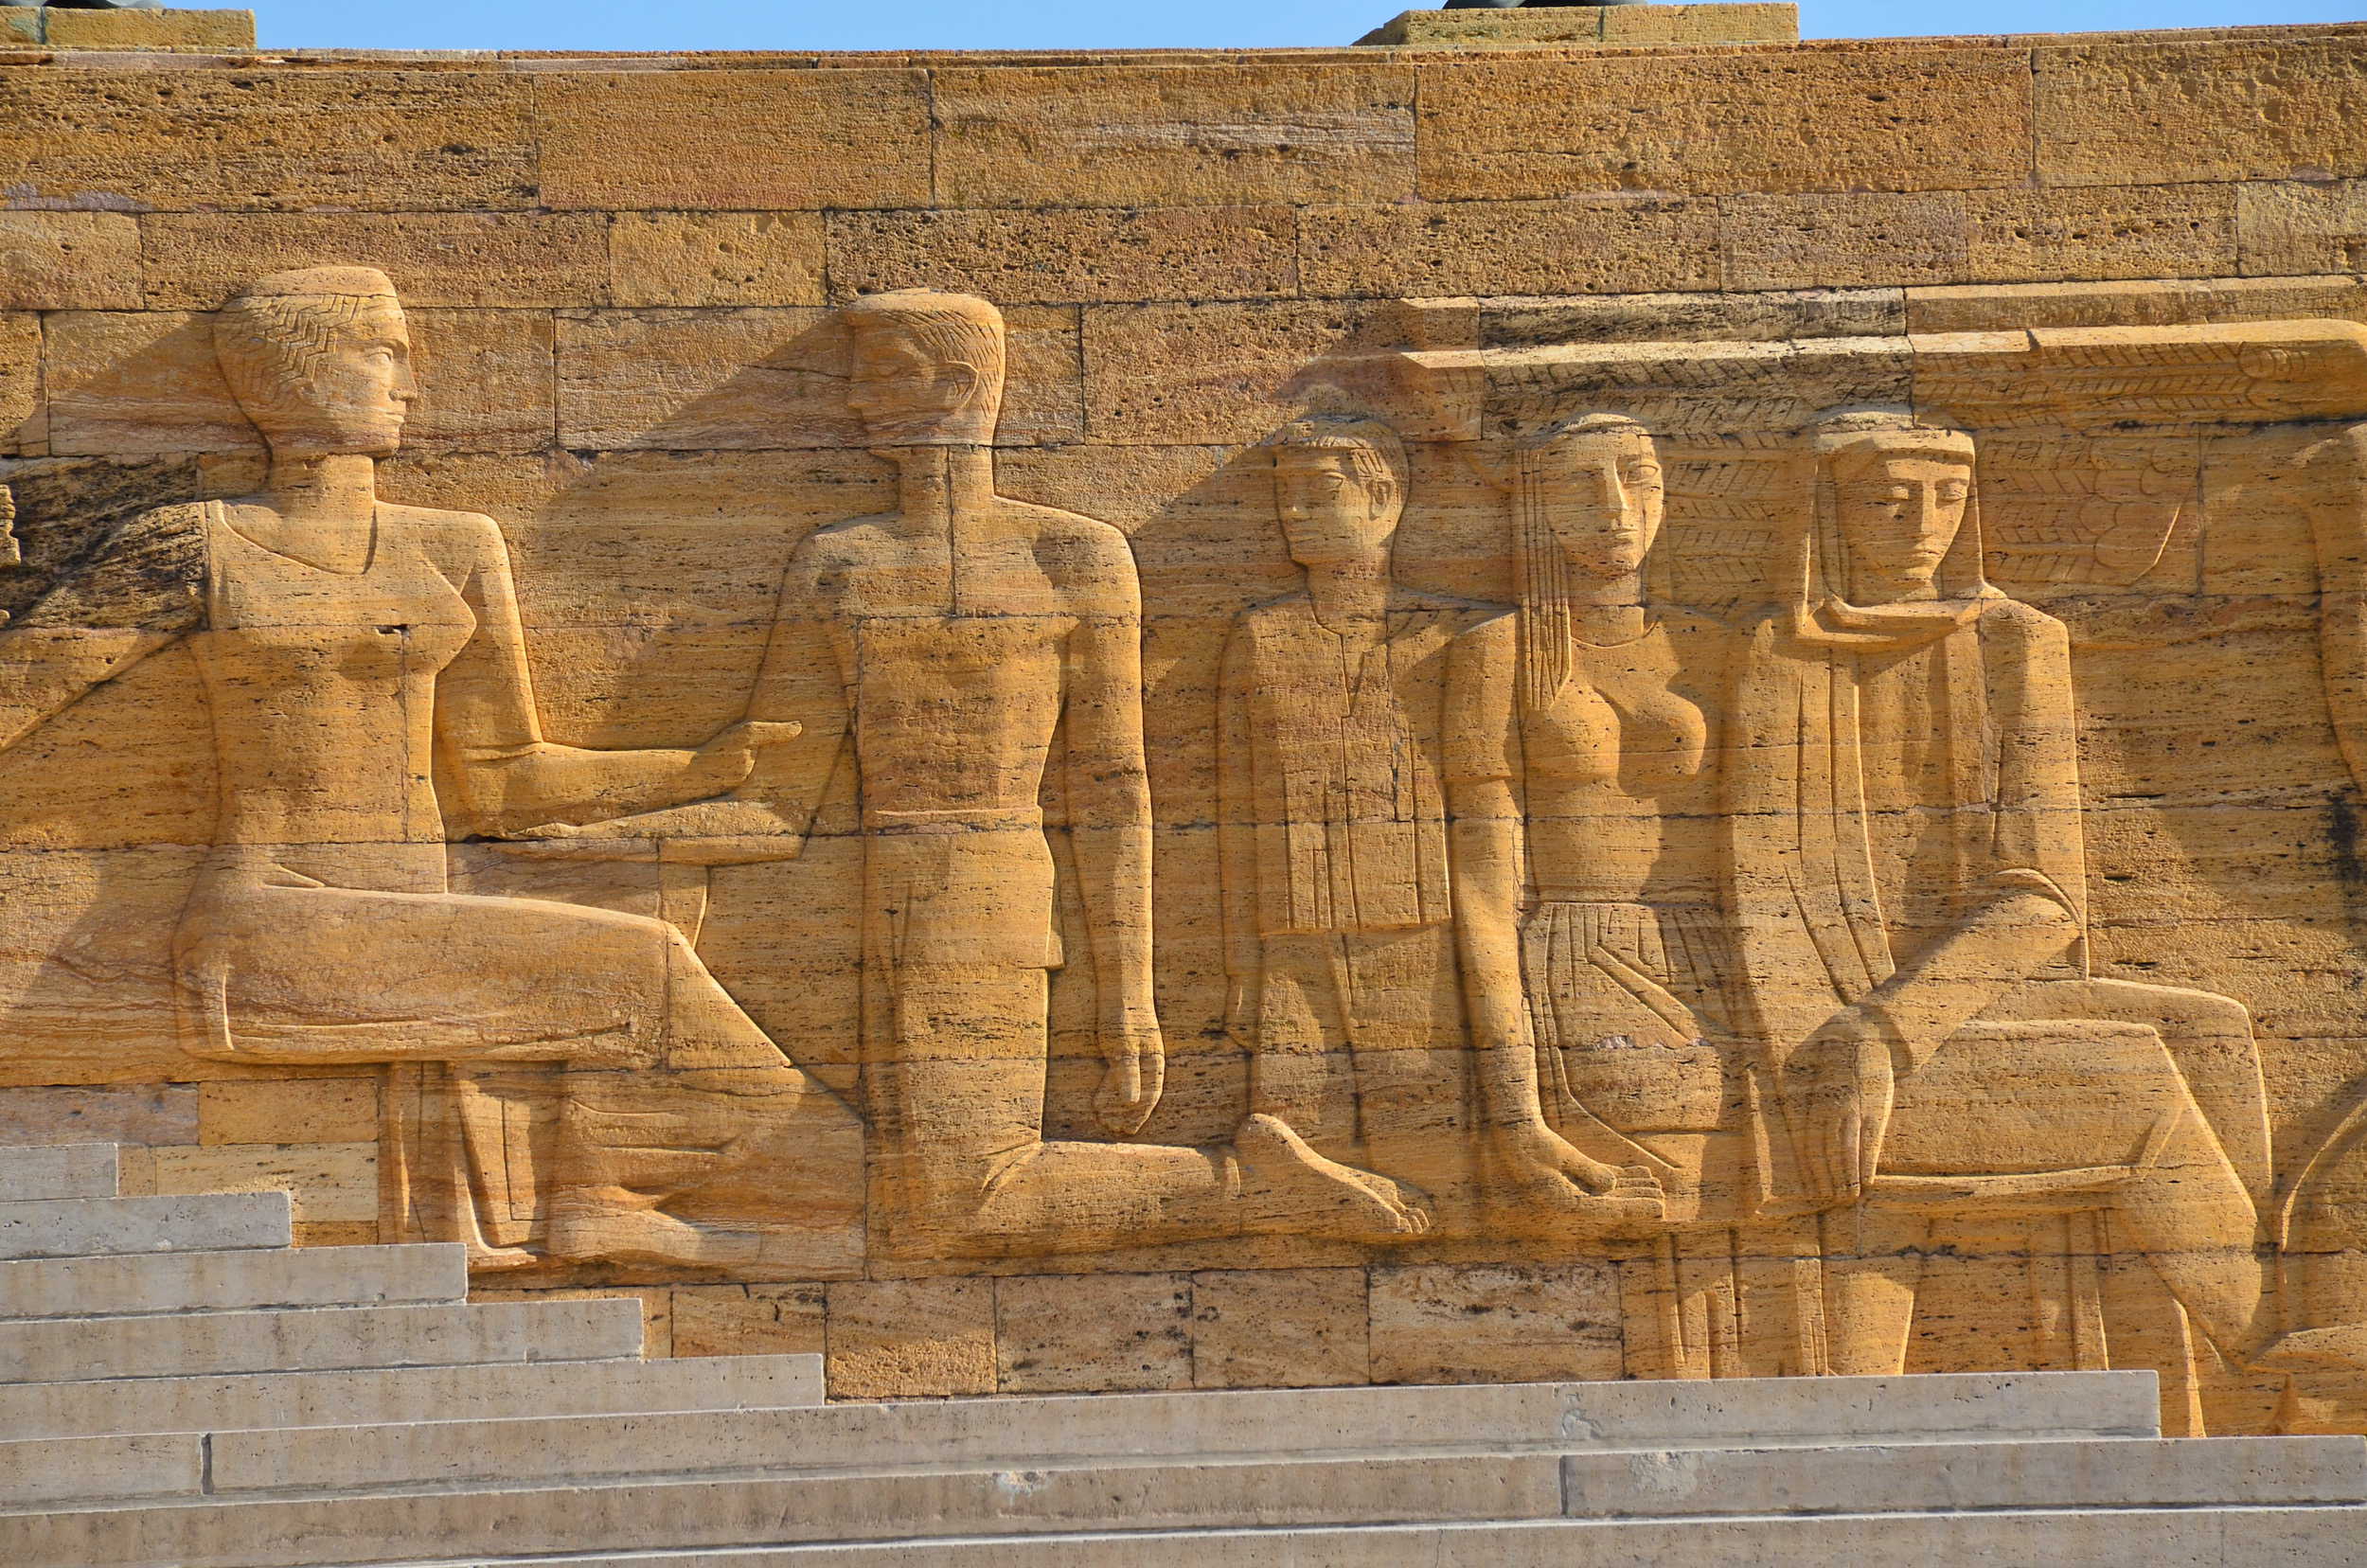 Relief of people under invasion (right) and the victory of the Turkish army kneeling in front of the motherland (left)